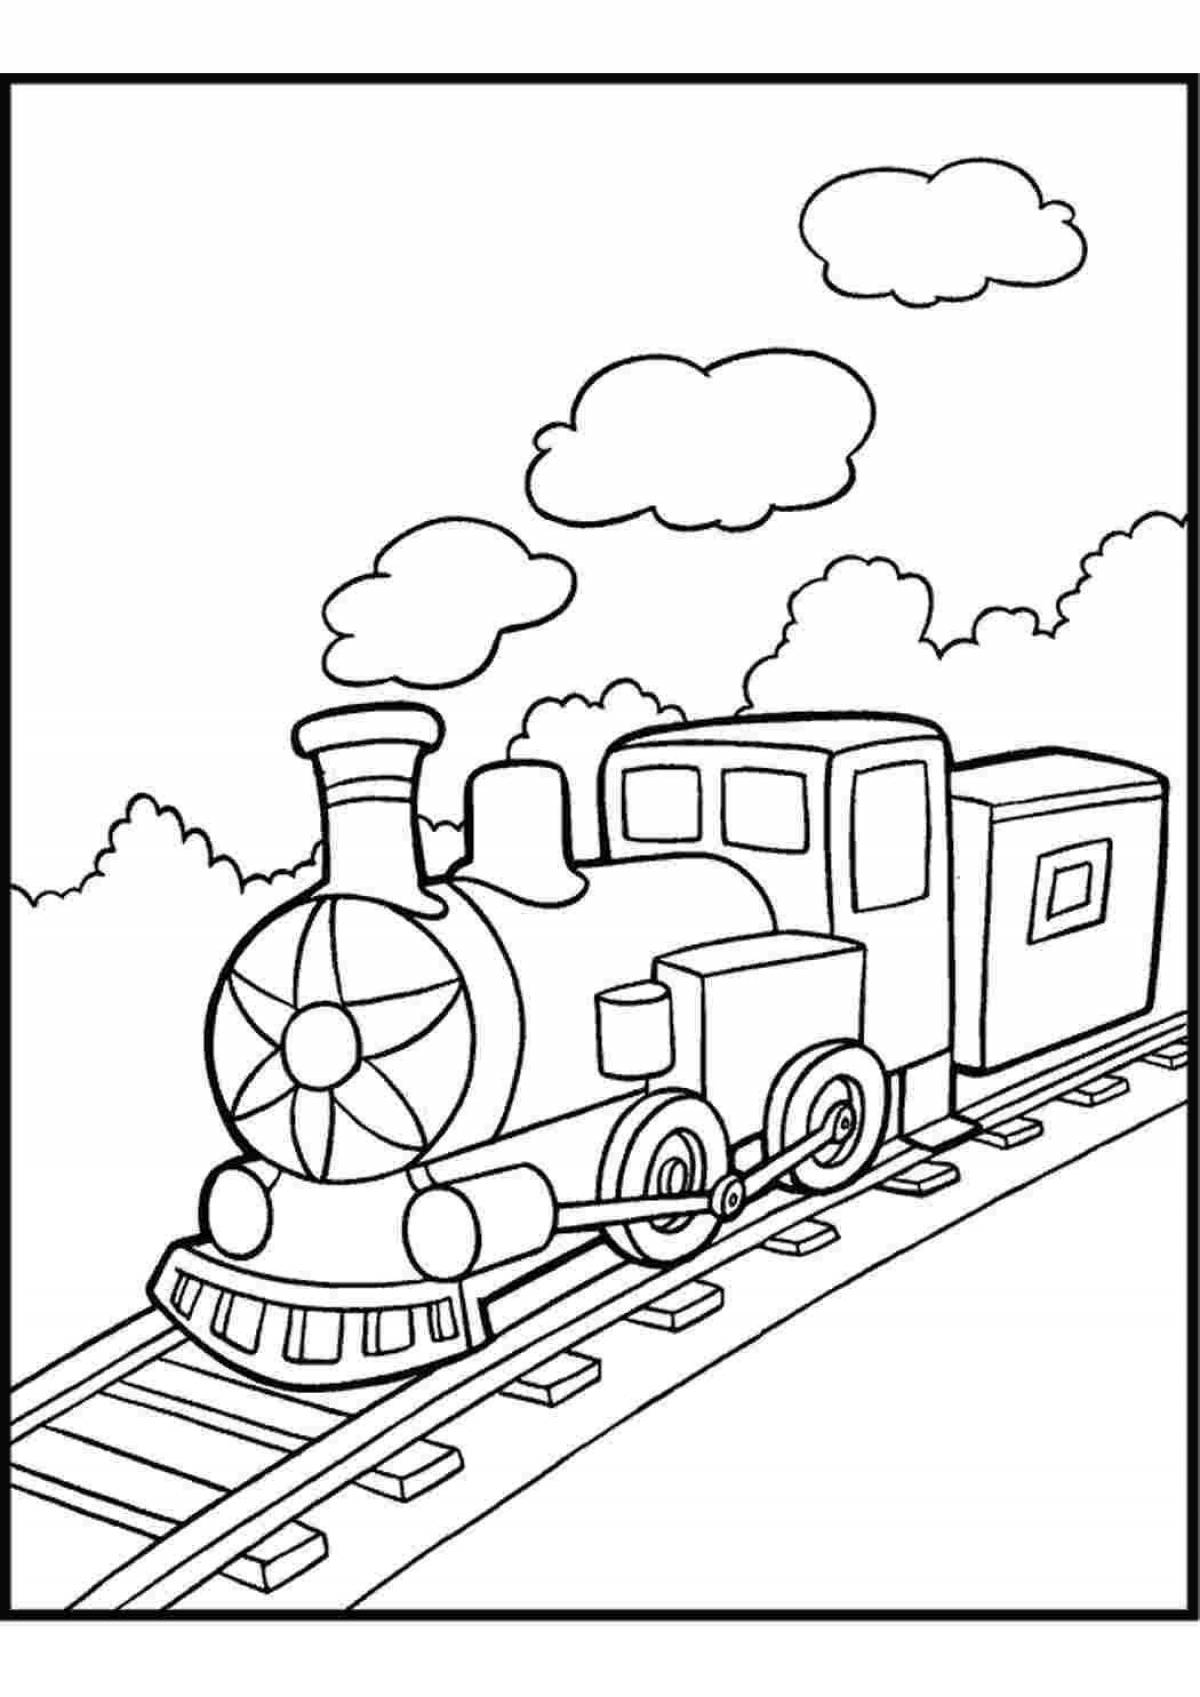 Coloring train for preschoolers 2-3 years old